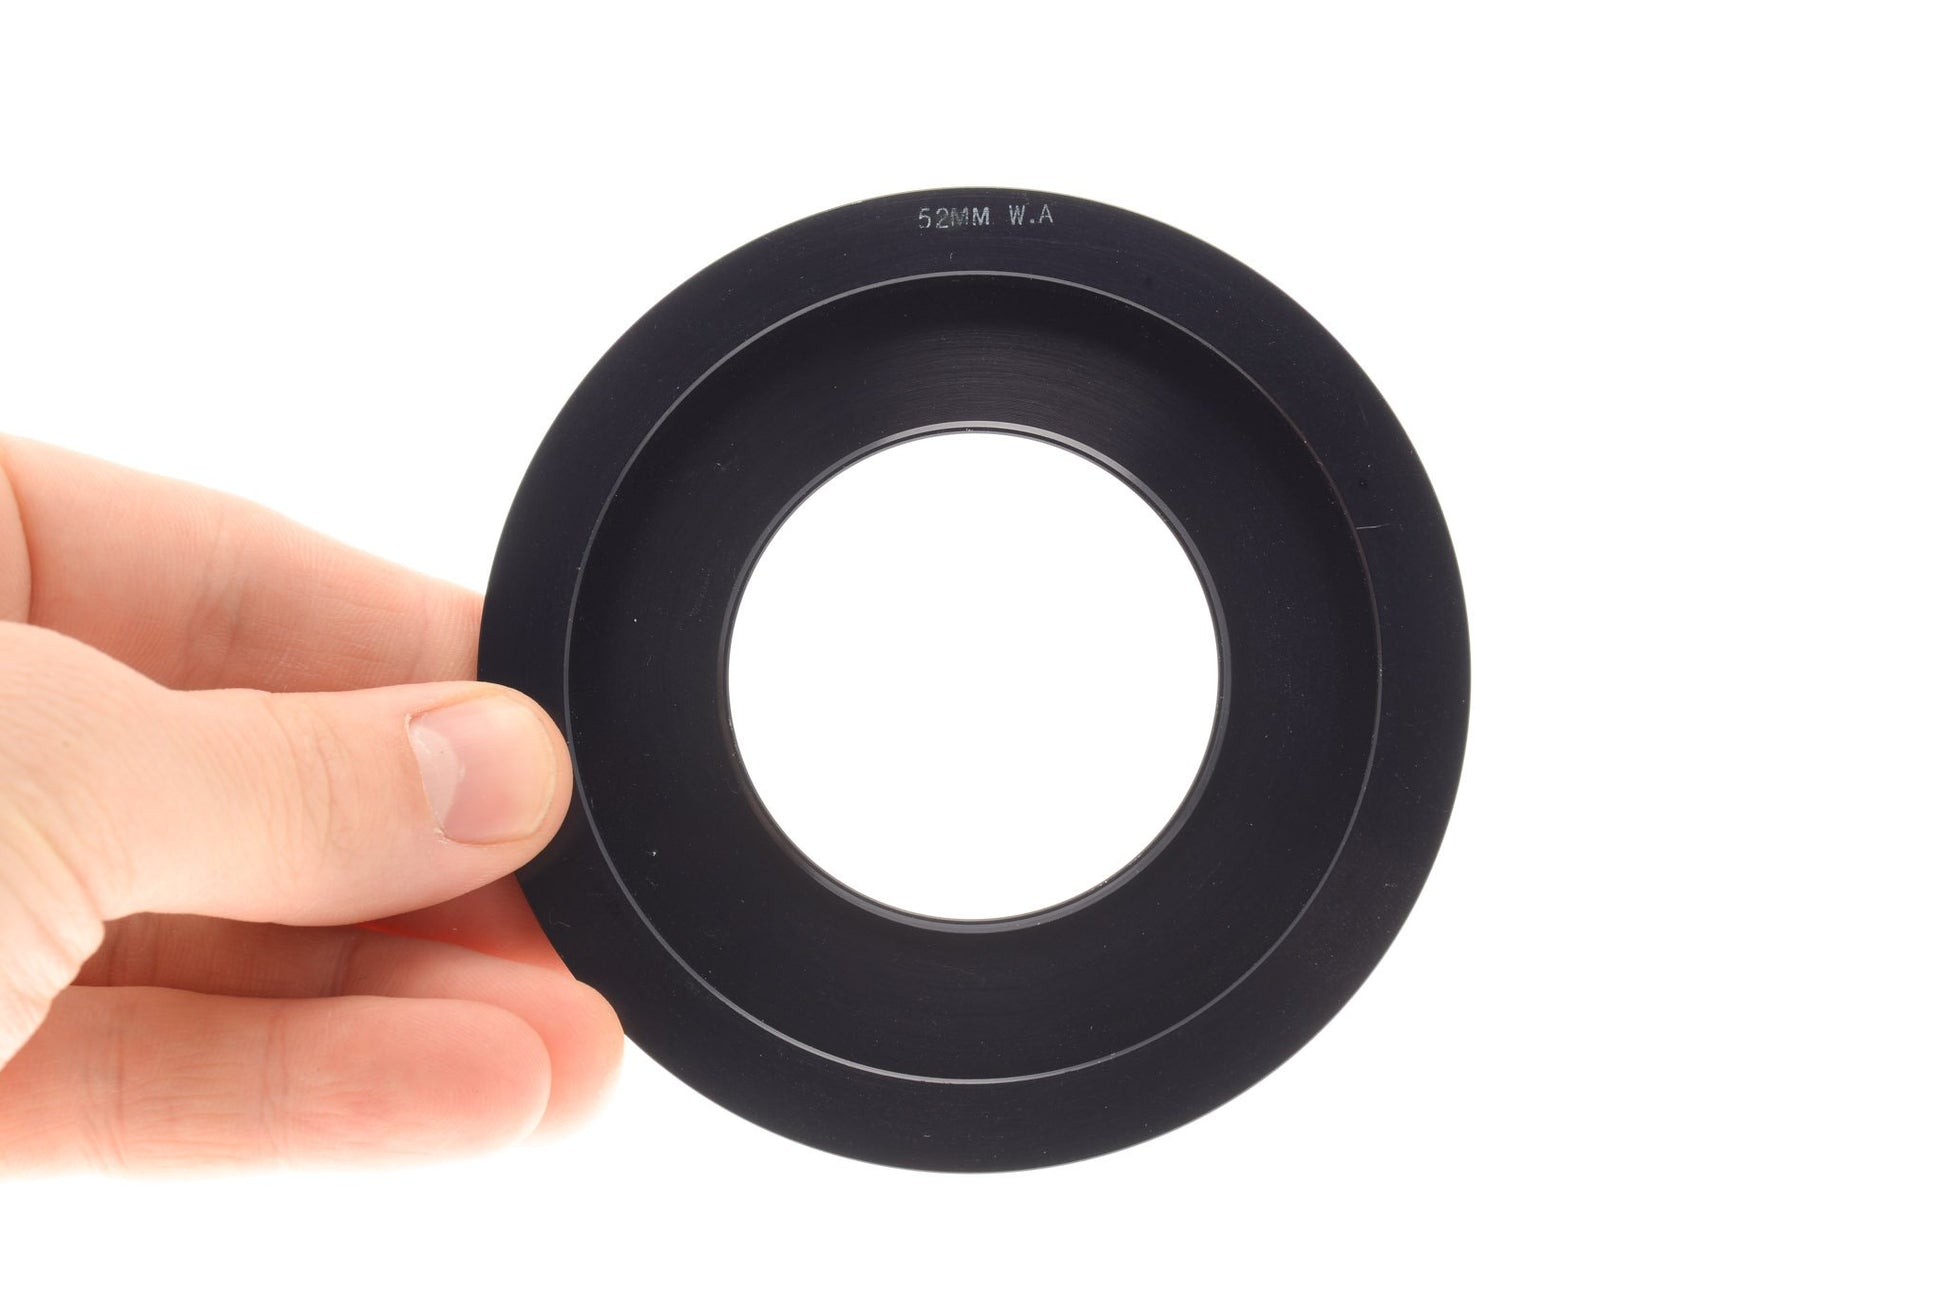 LEE Filters Wide Angle Adapter Ring - Accessory